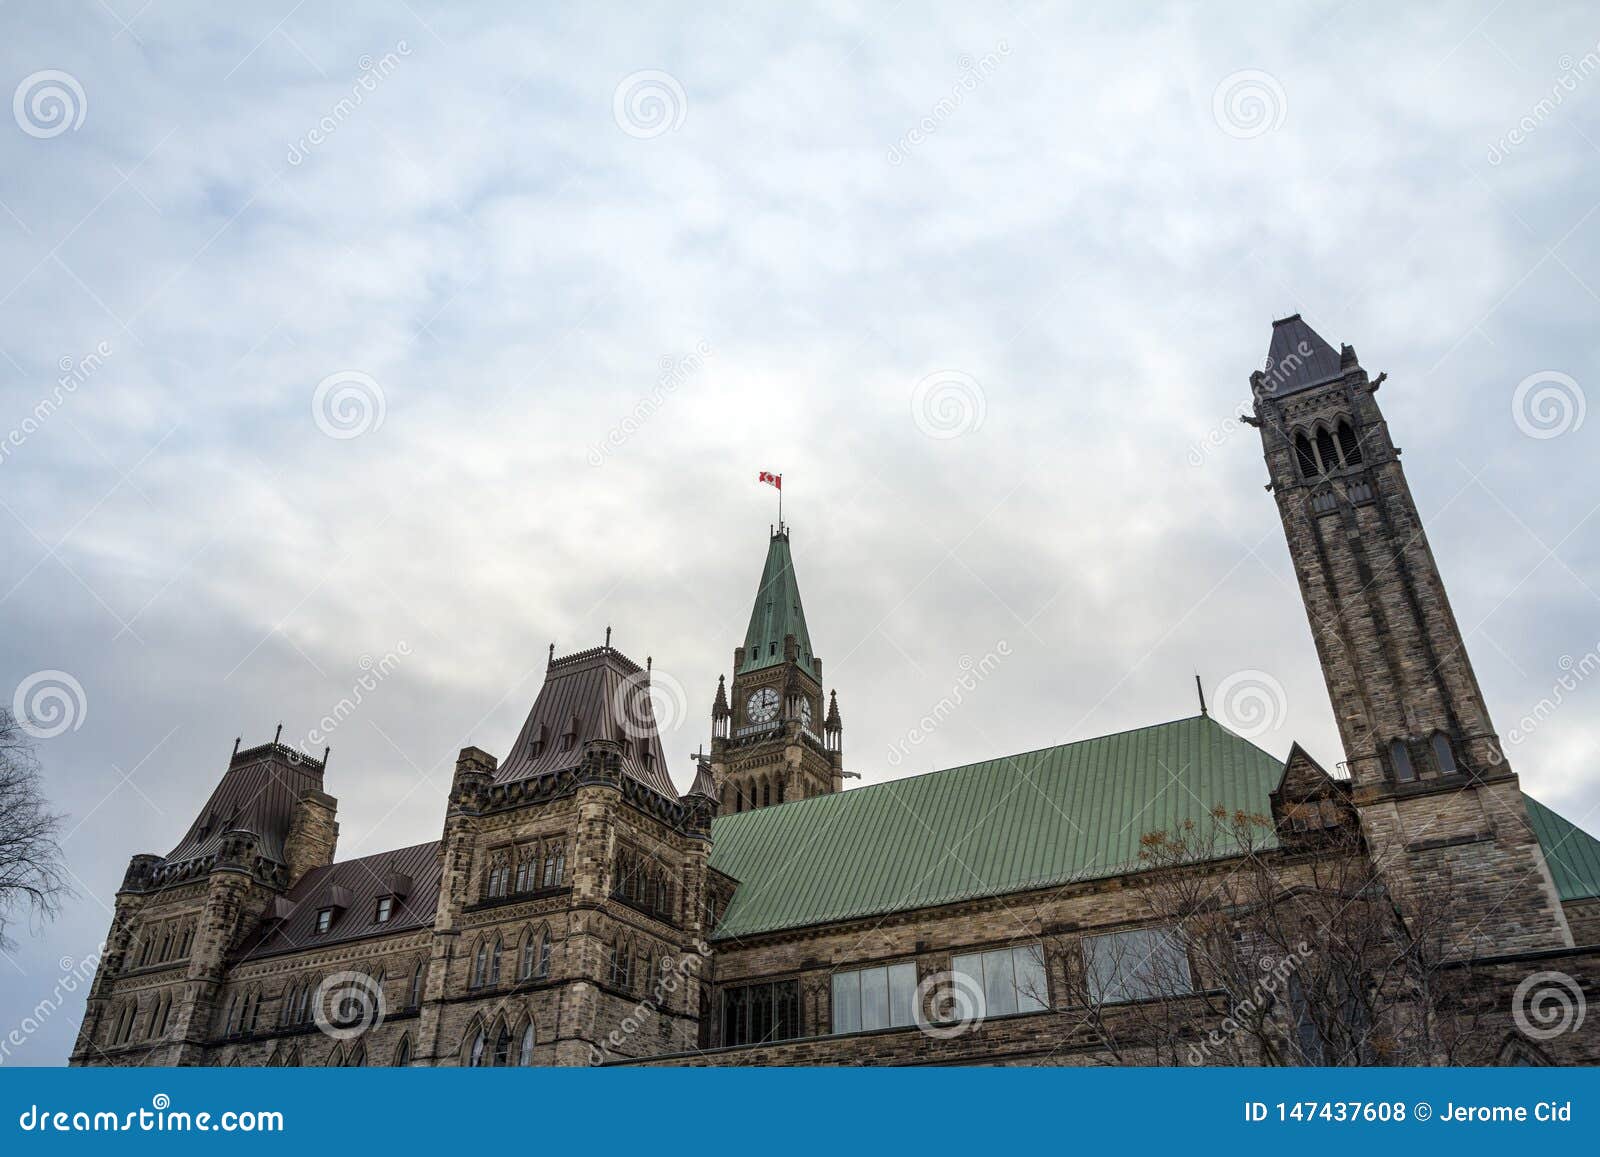 main tower of the center block of the parliament of canada, in the canadian parliamentary complex of ottawa, ontario.